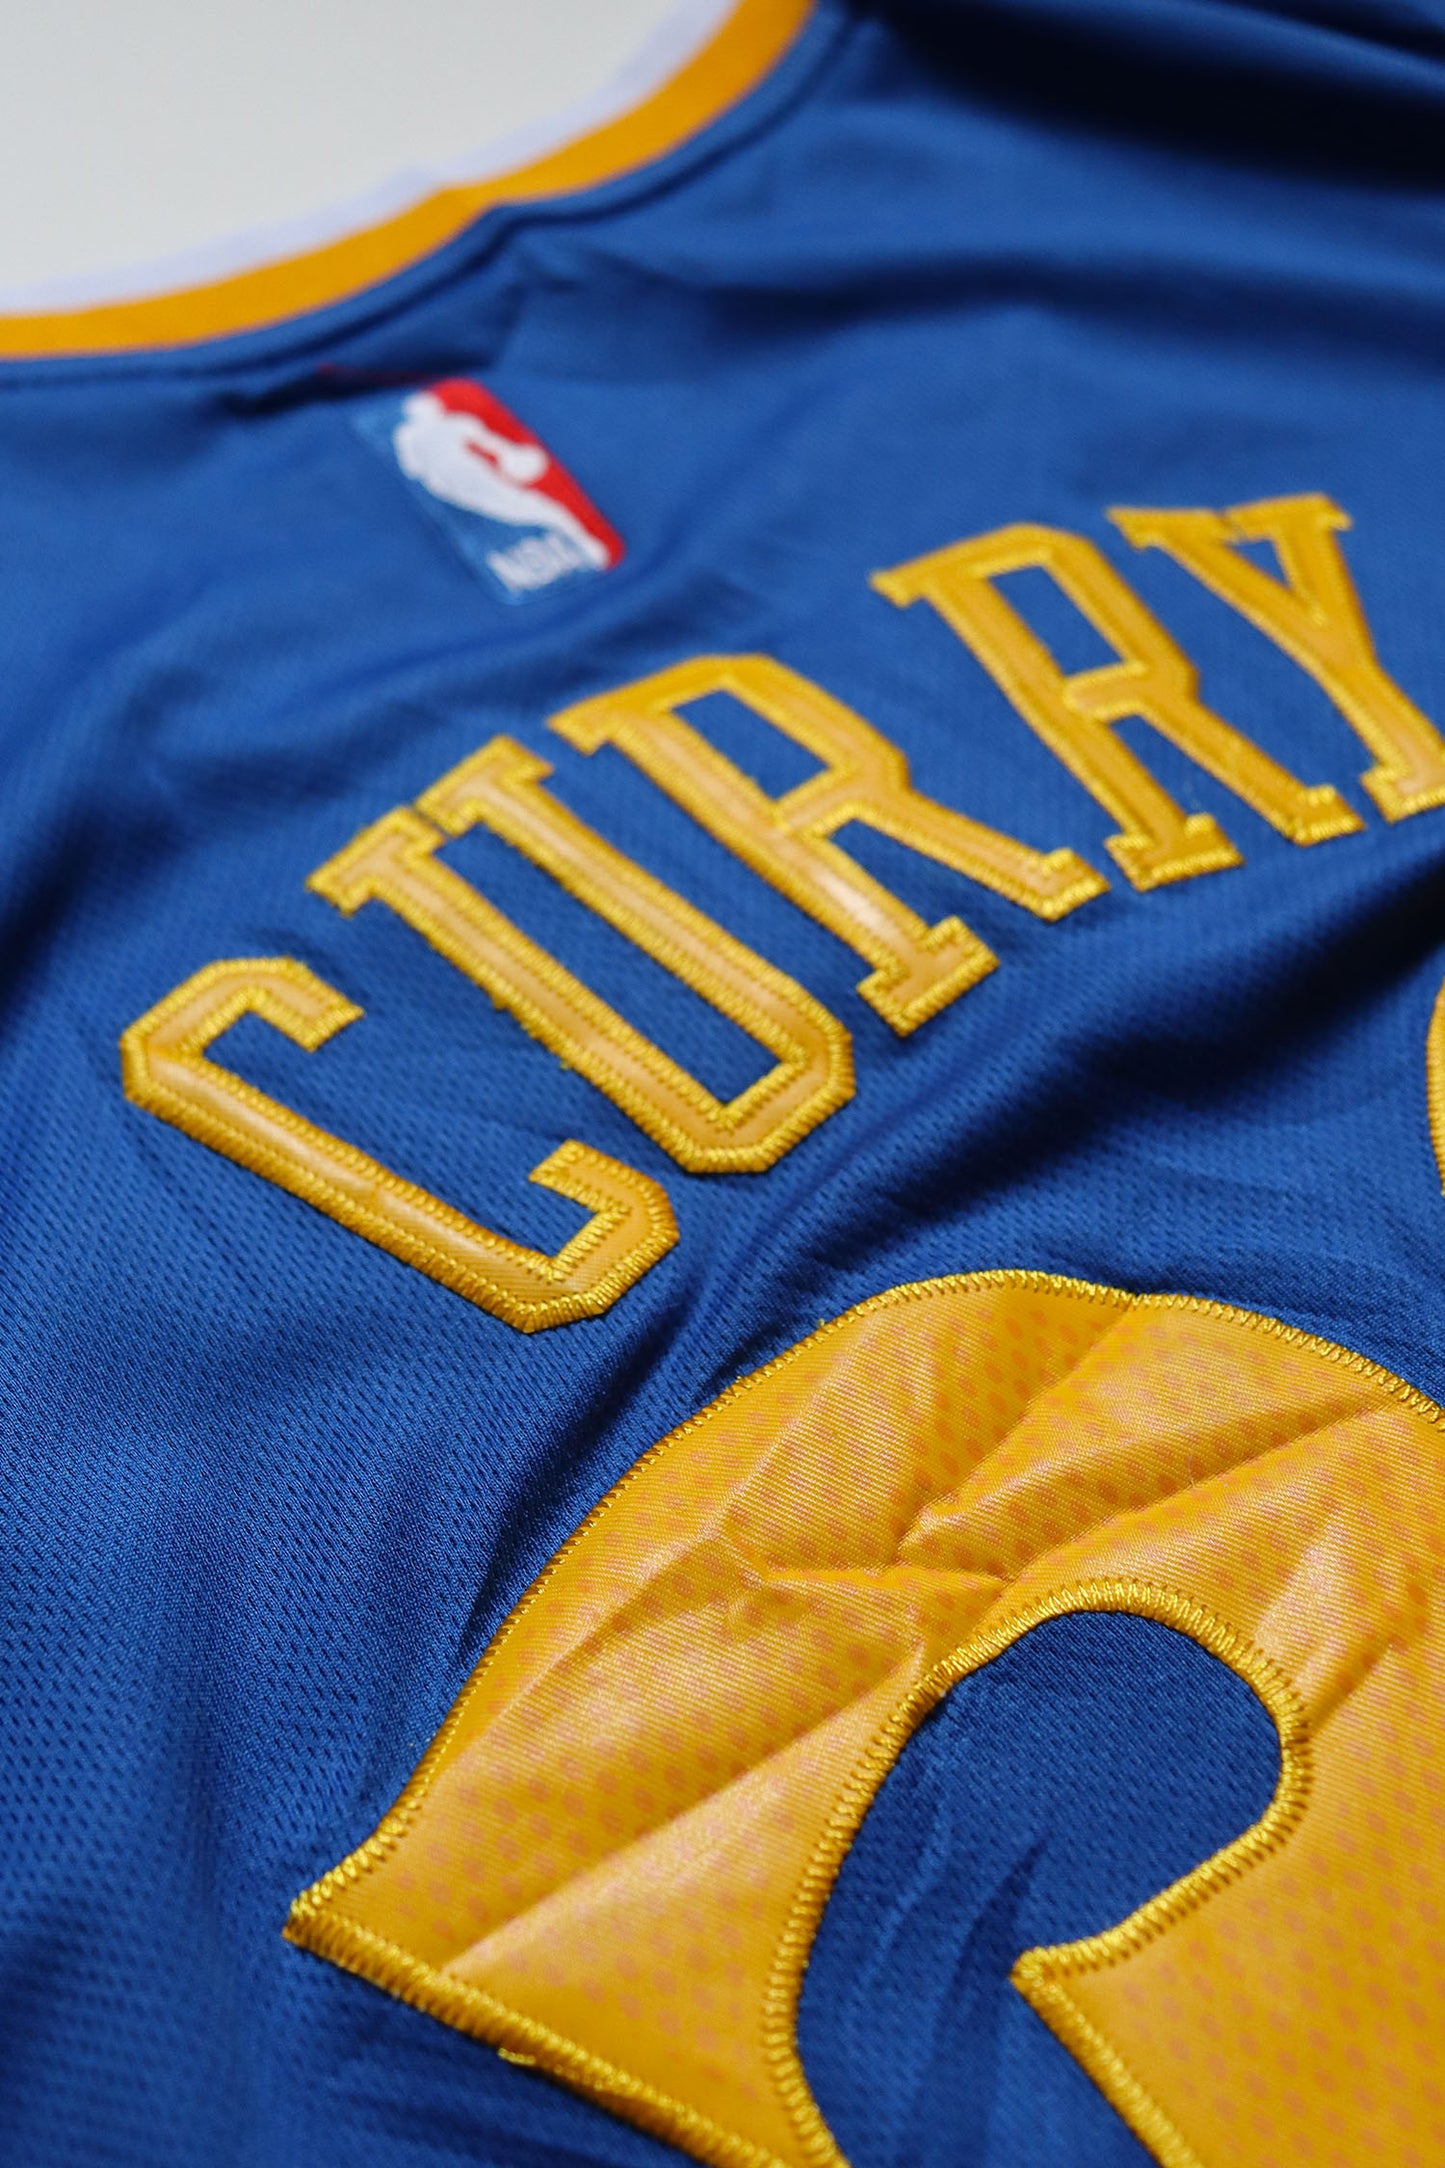 Maillot Stephen Curry Golden State Warriors